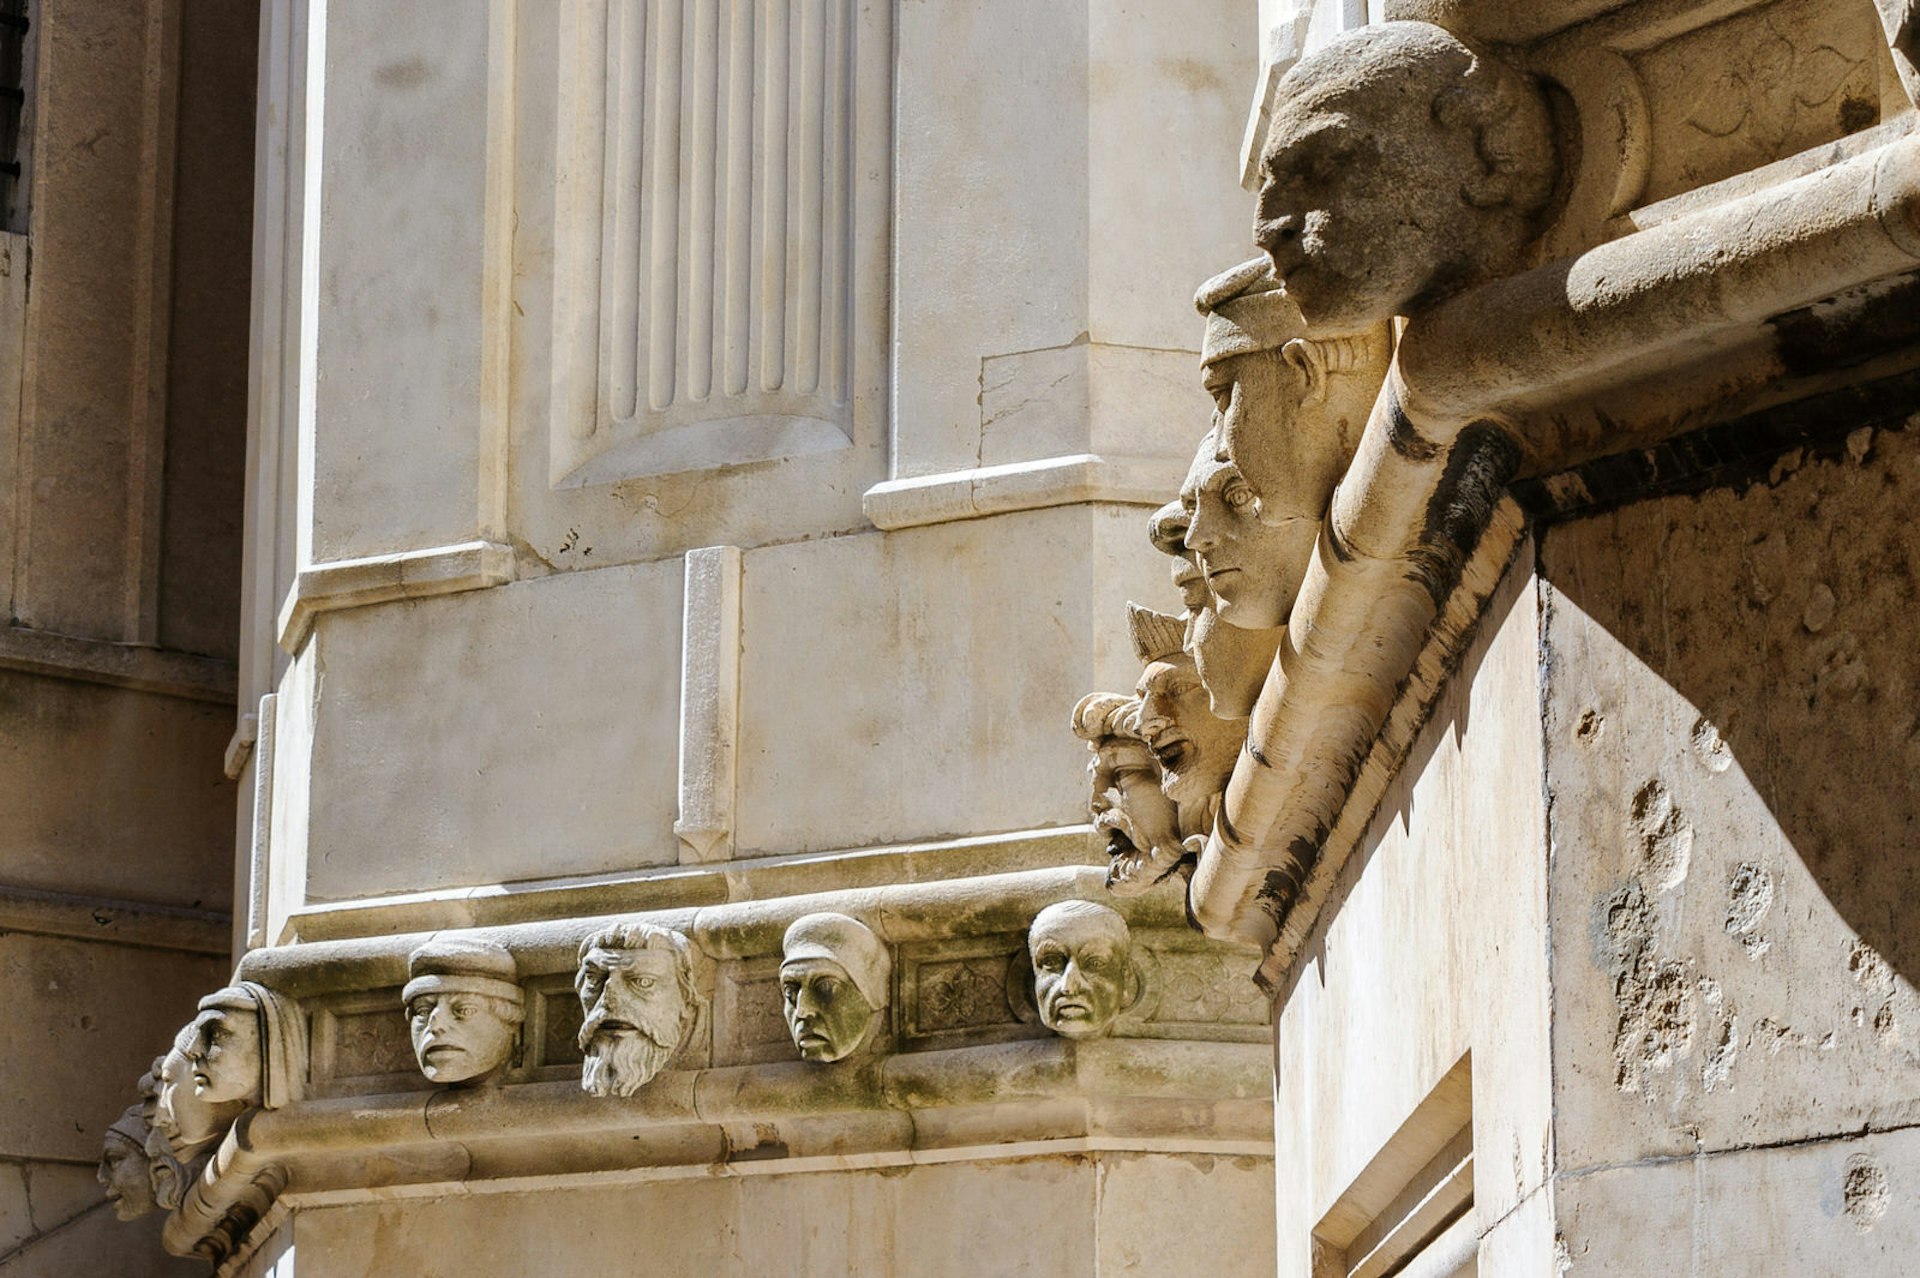 Šibenik cathedral's sculpted head are reminiscent of Braavos's Hall of Faces